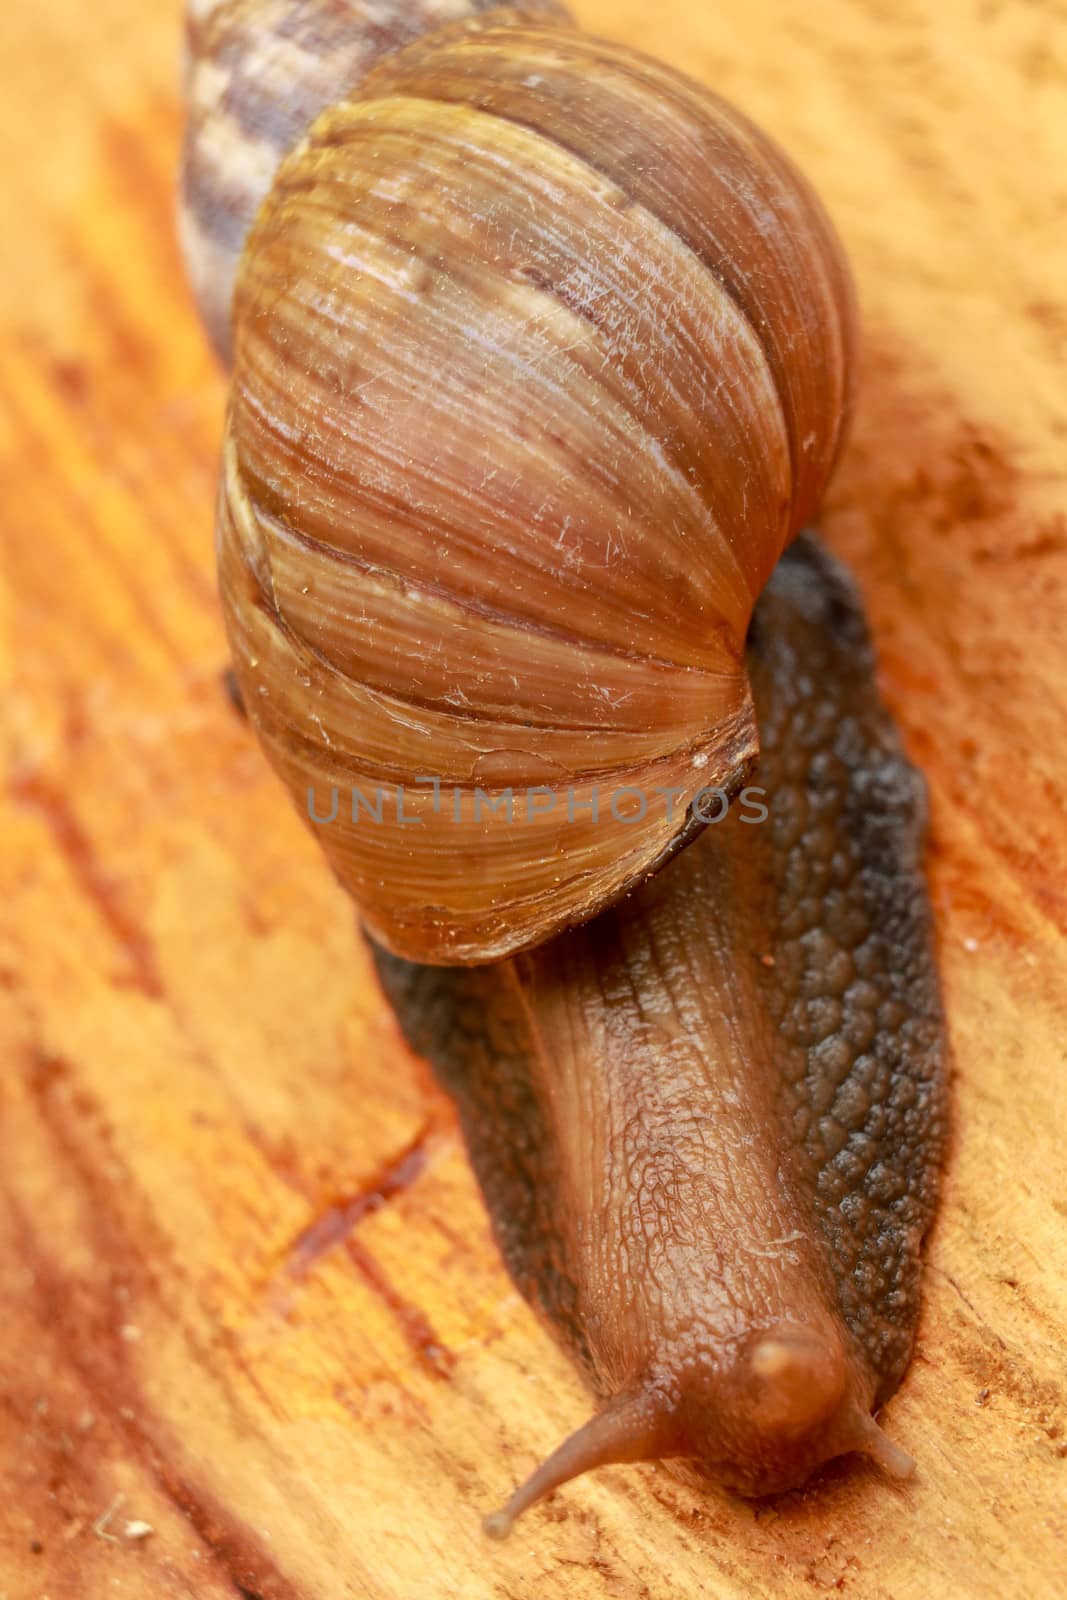 Top view of Snail Achatina fulica, African giant snail, Archachatina marginata with natural background. The Snail is on the wood.Beautiful patterned brown snail crawl on the wood surface. African snail shrugs by Sanatana2008